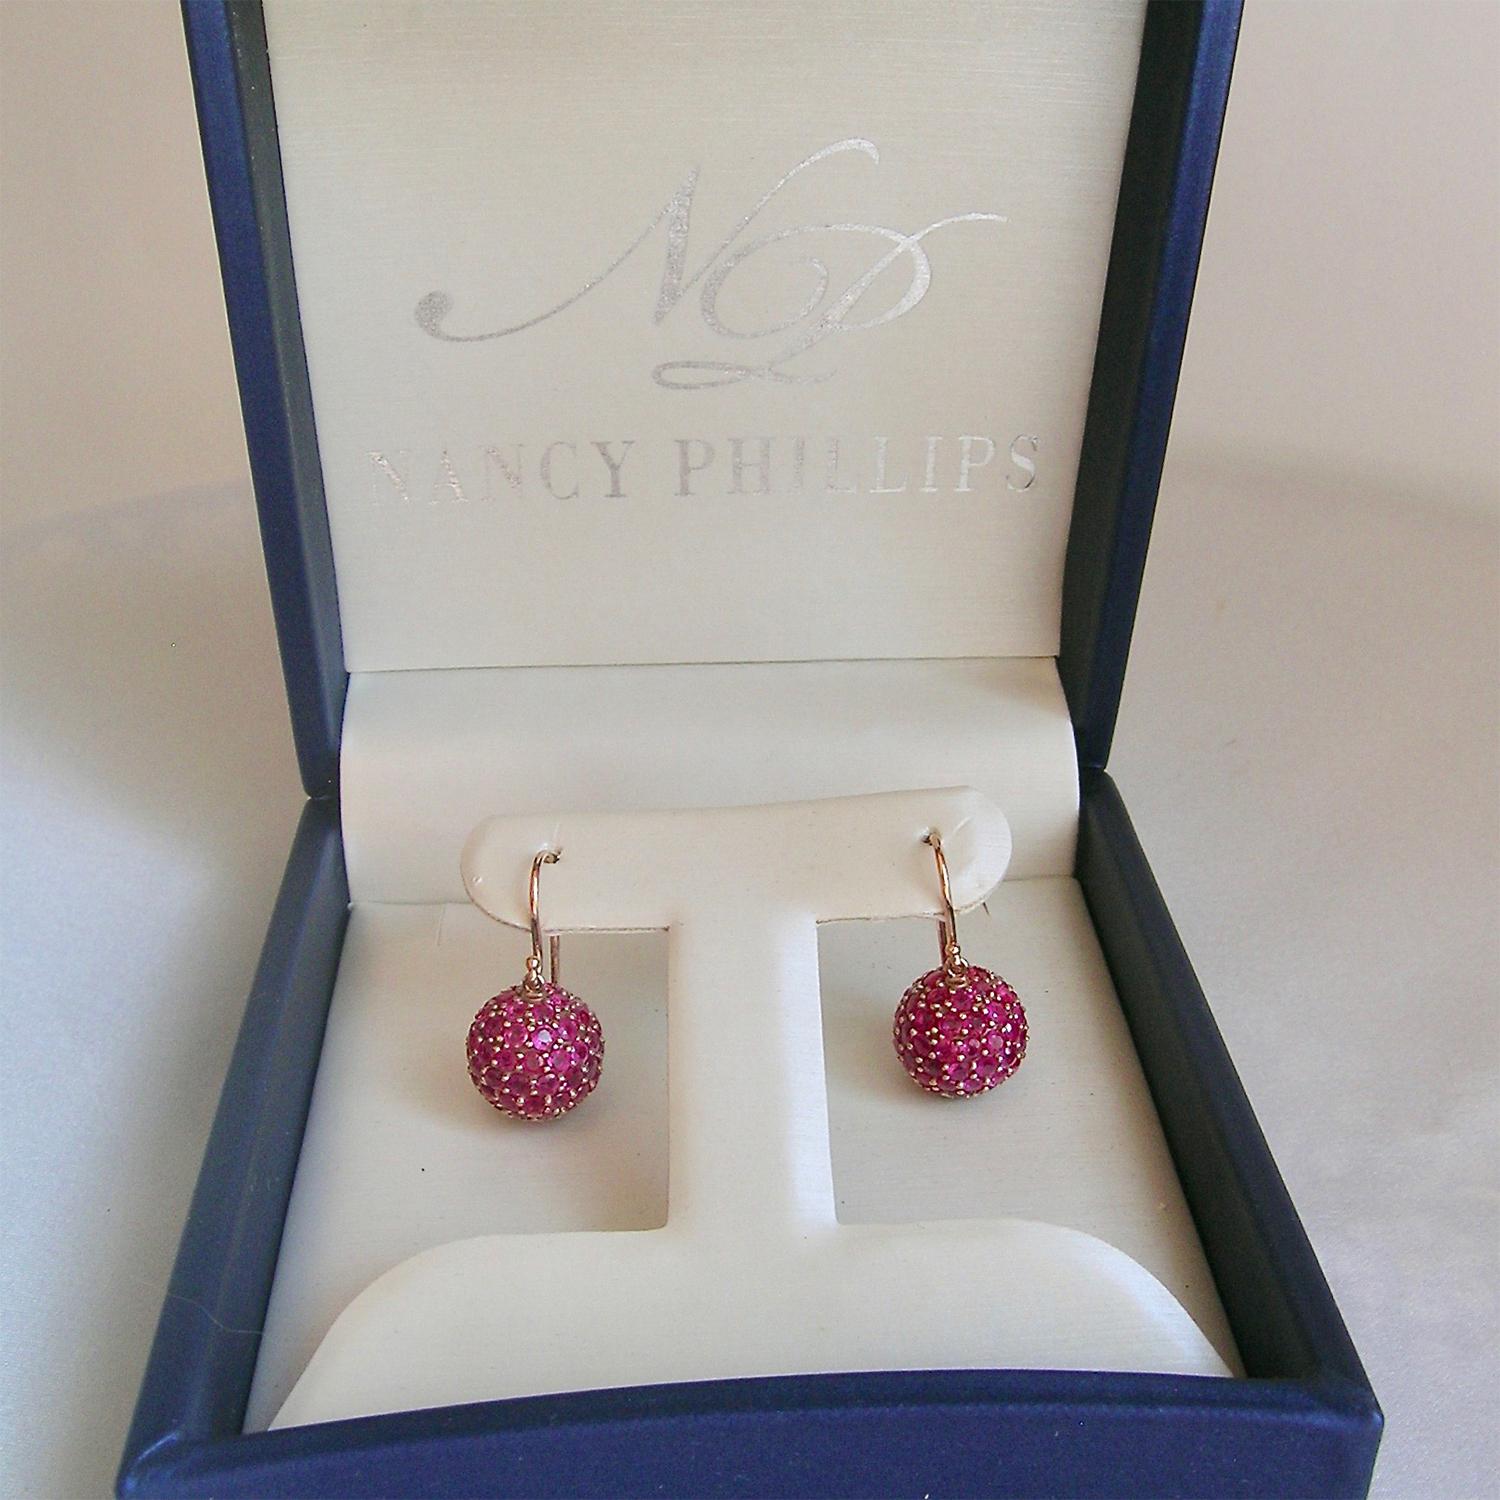 Stunning Burmese rubies (12.96cts!) comprise these classic ball shaped earrings.  The rubies are prong set into 18k Rose Gold.  These are fun earrings which can be worn with jeans in the day and look fabulous out that night.  Light weight and full